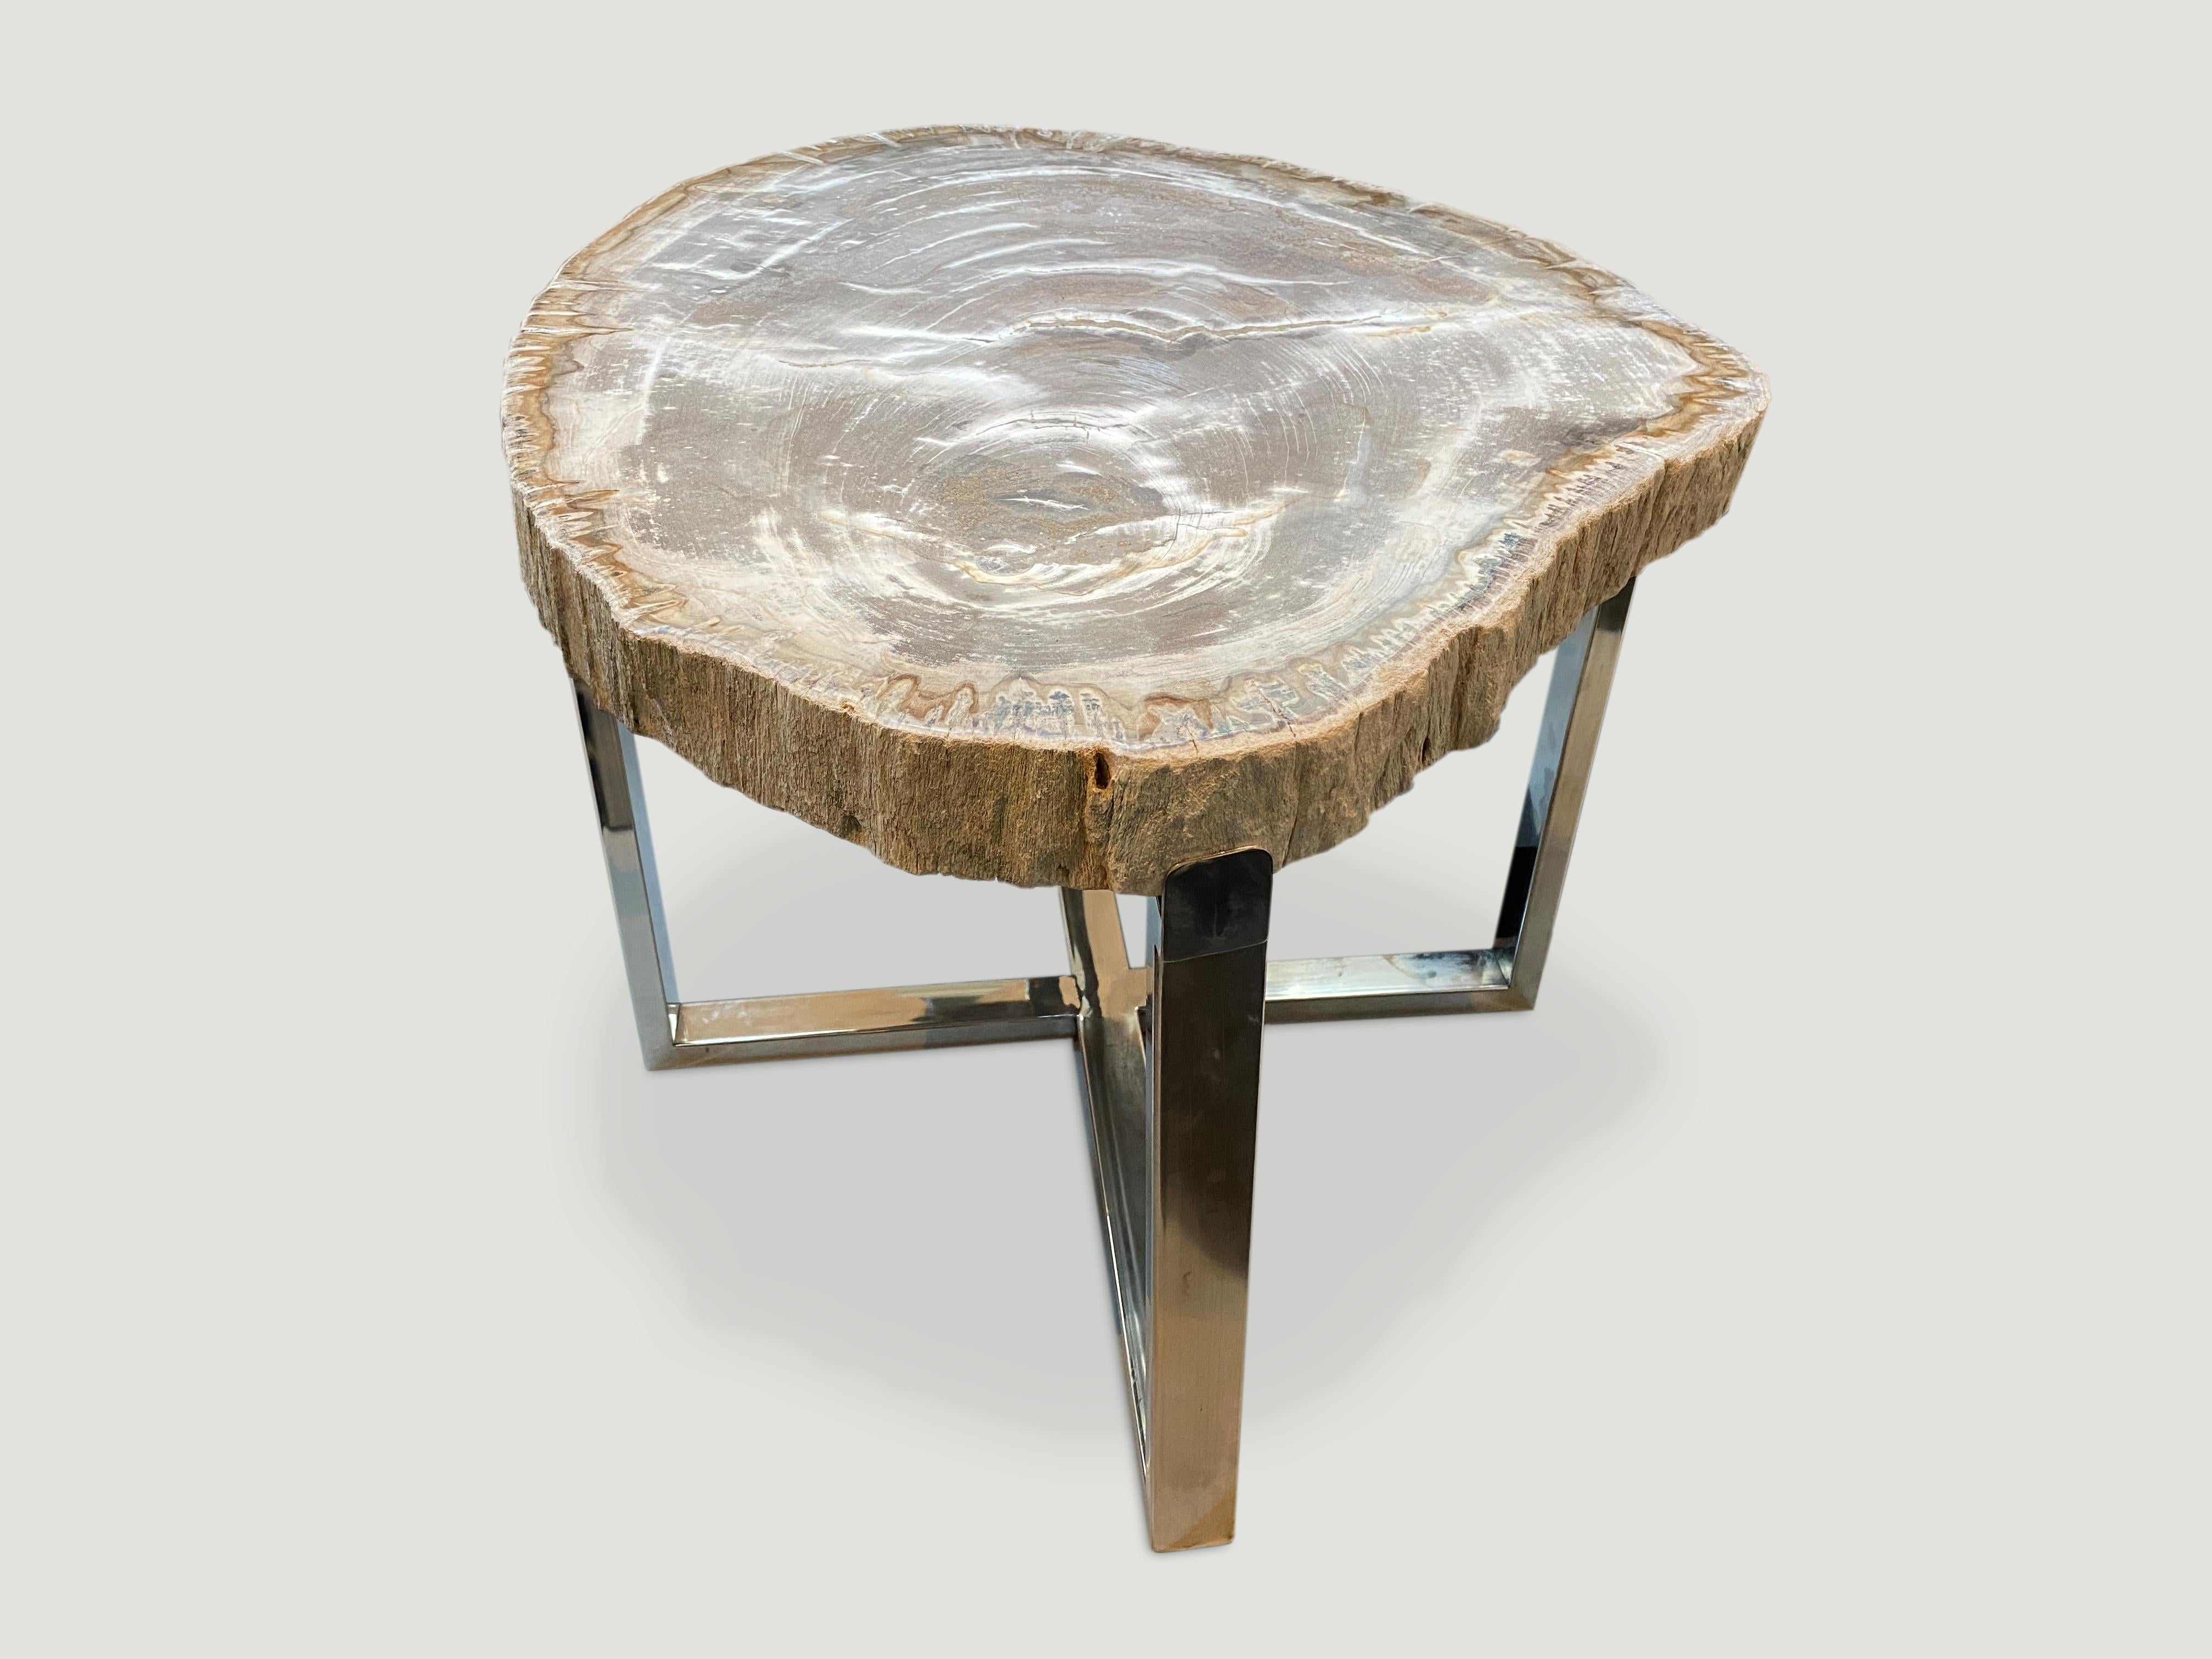 Stunning neutral tones in this high quality petrified wood 2.5” slab top side table. We have added a Minimalist stainless steel base.

As with a diamond, we polish the highest quality fossilized petrified wood, using our latest ground breaking